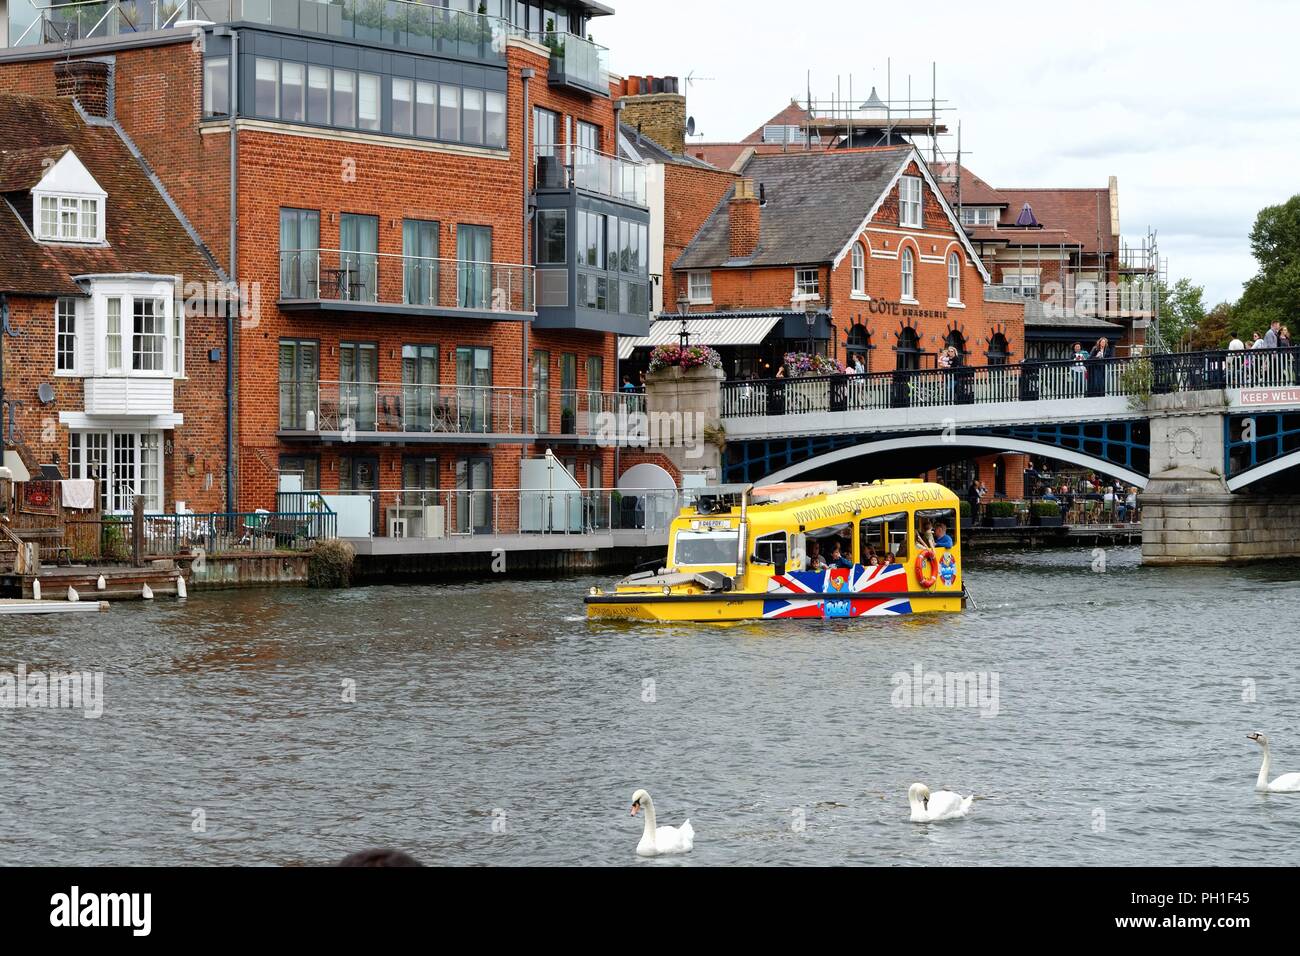 A Windsor Duck Tours amphibious boat on the River Thames at Eton and Windsor Berkshire England UK Stock Photo